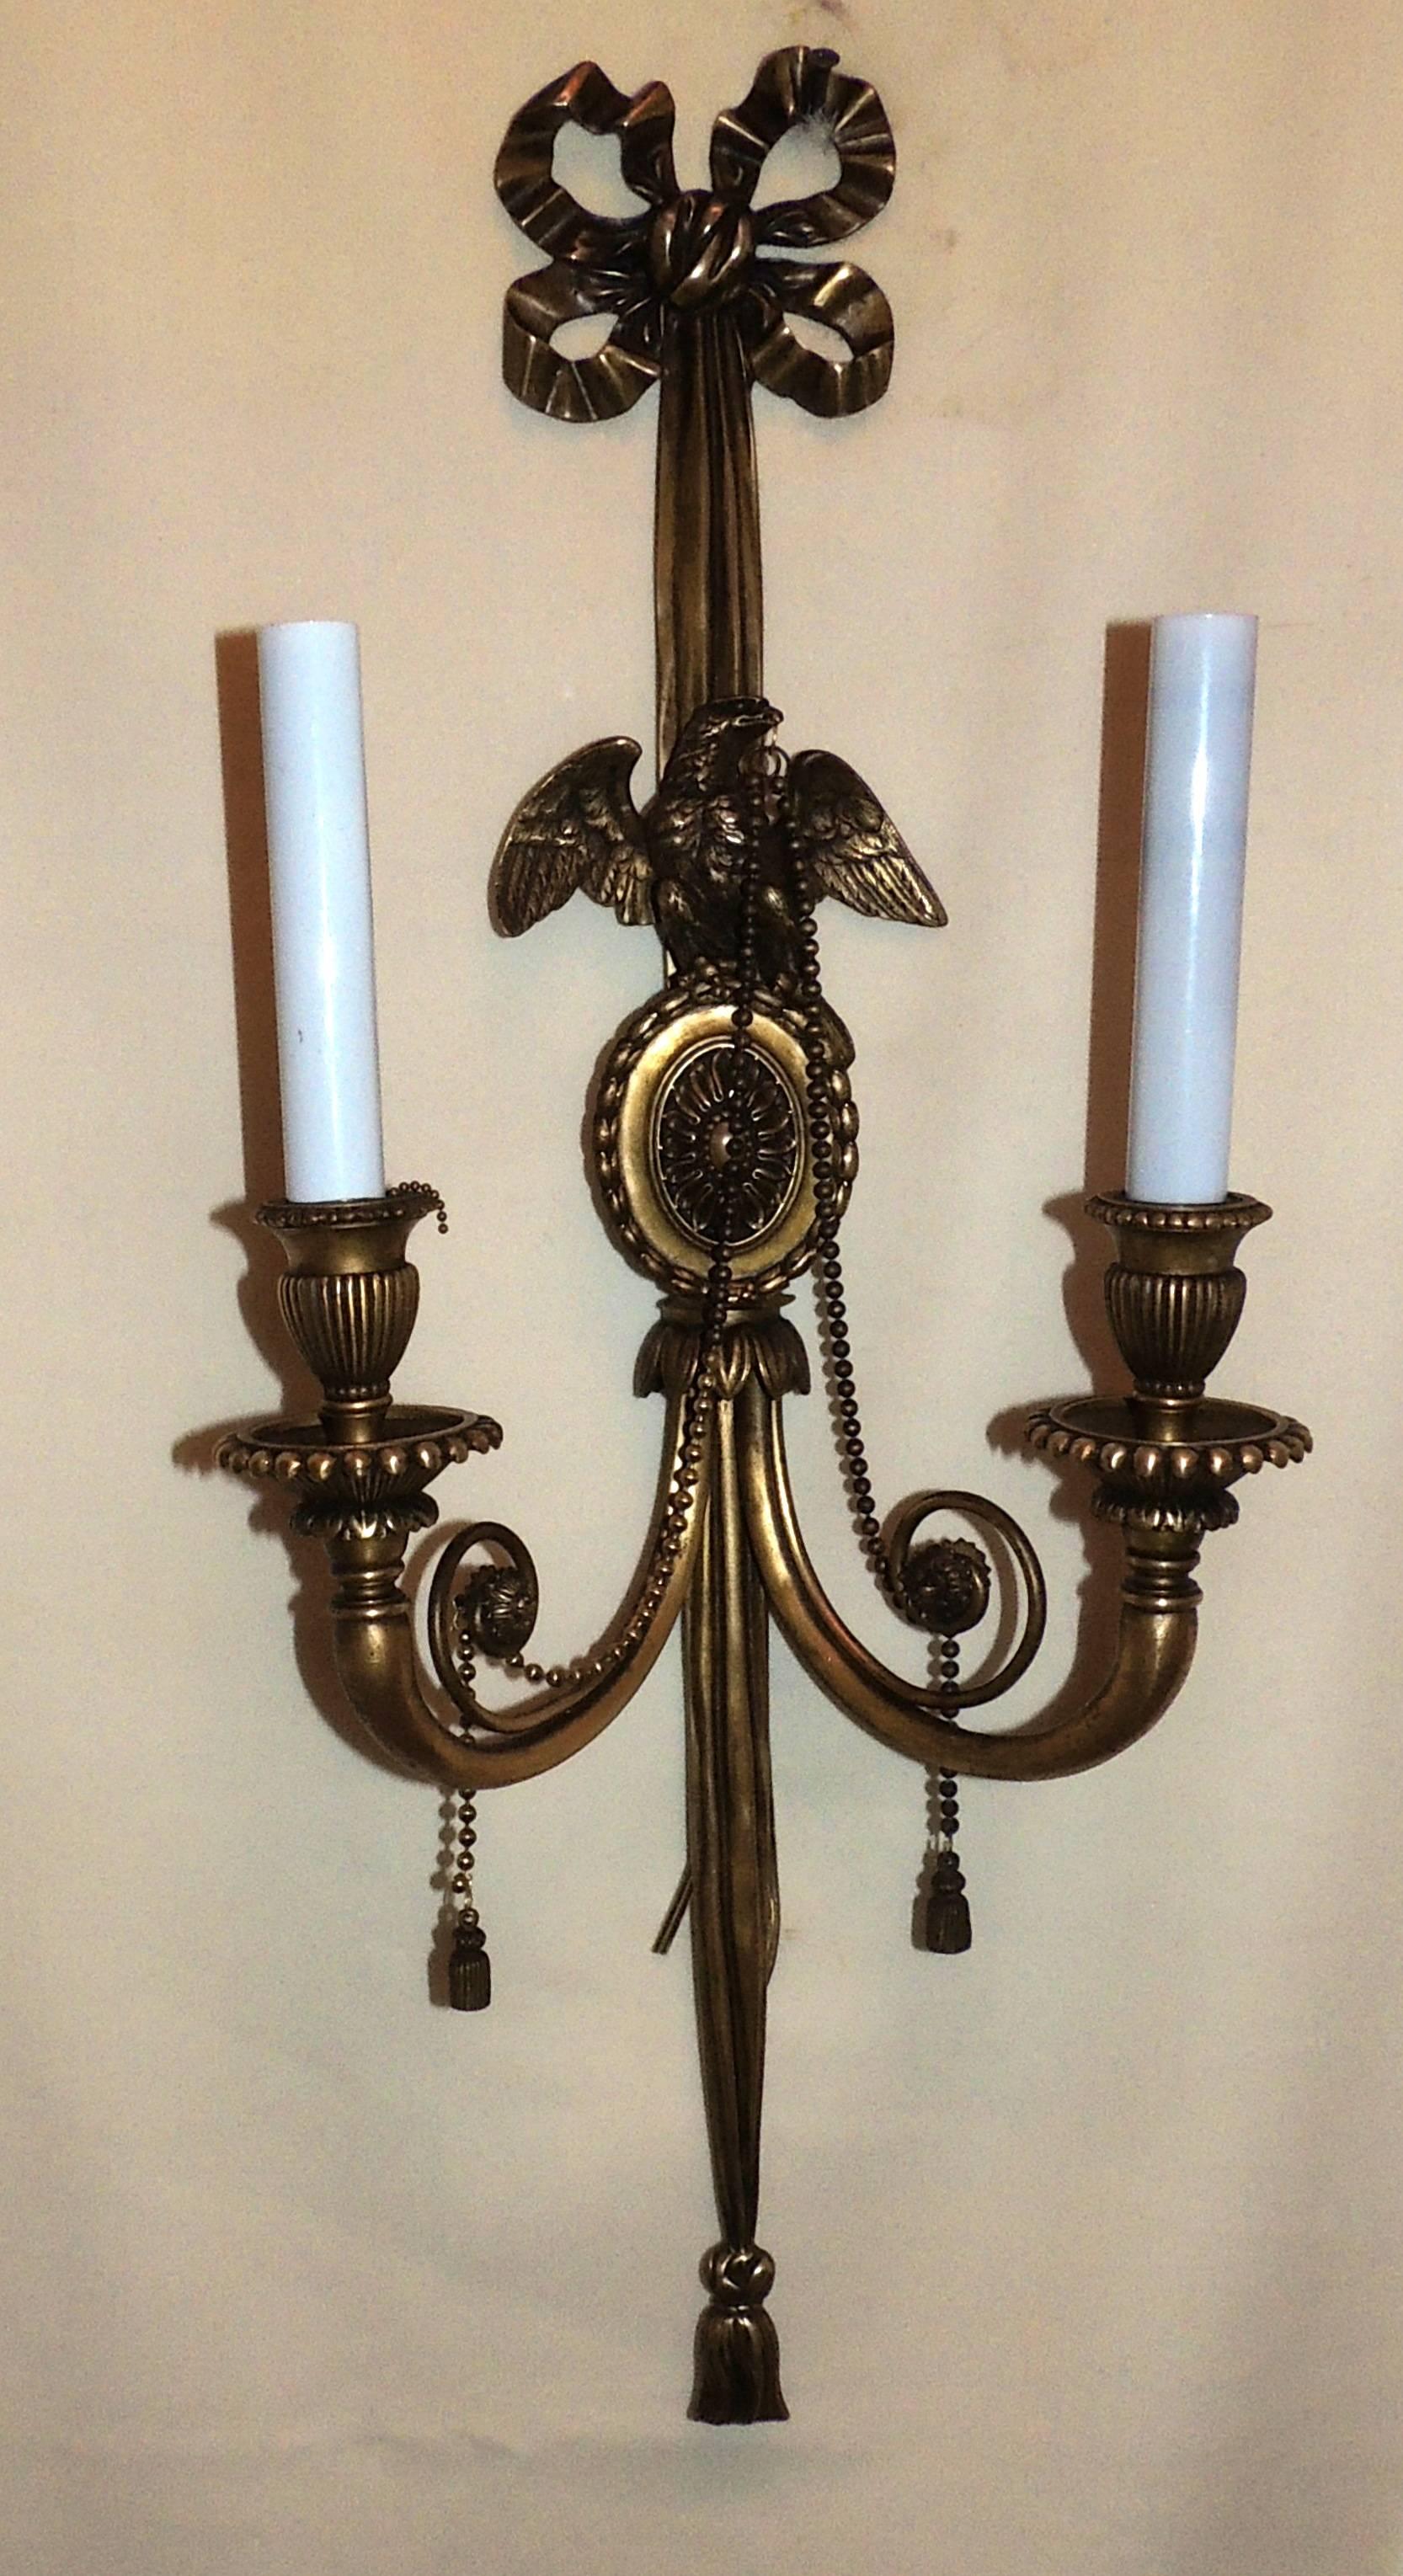 A wonderful pair of bronze neoclassical or Empire eagle centre medallion bow top and tassel sconces with beaded swags. Each with two sockets, completely rewired and ready to enjoy.